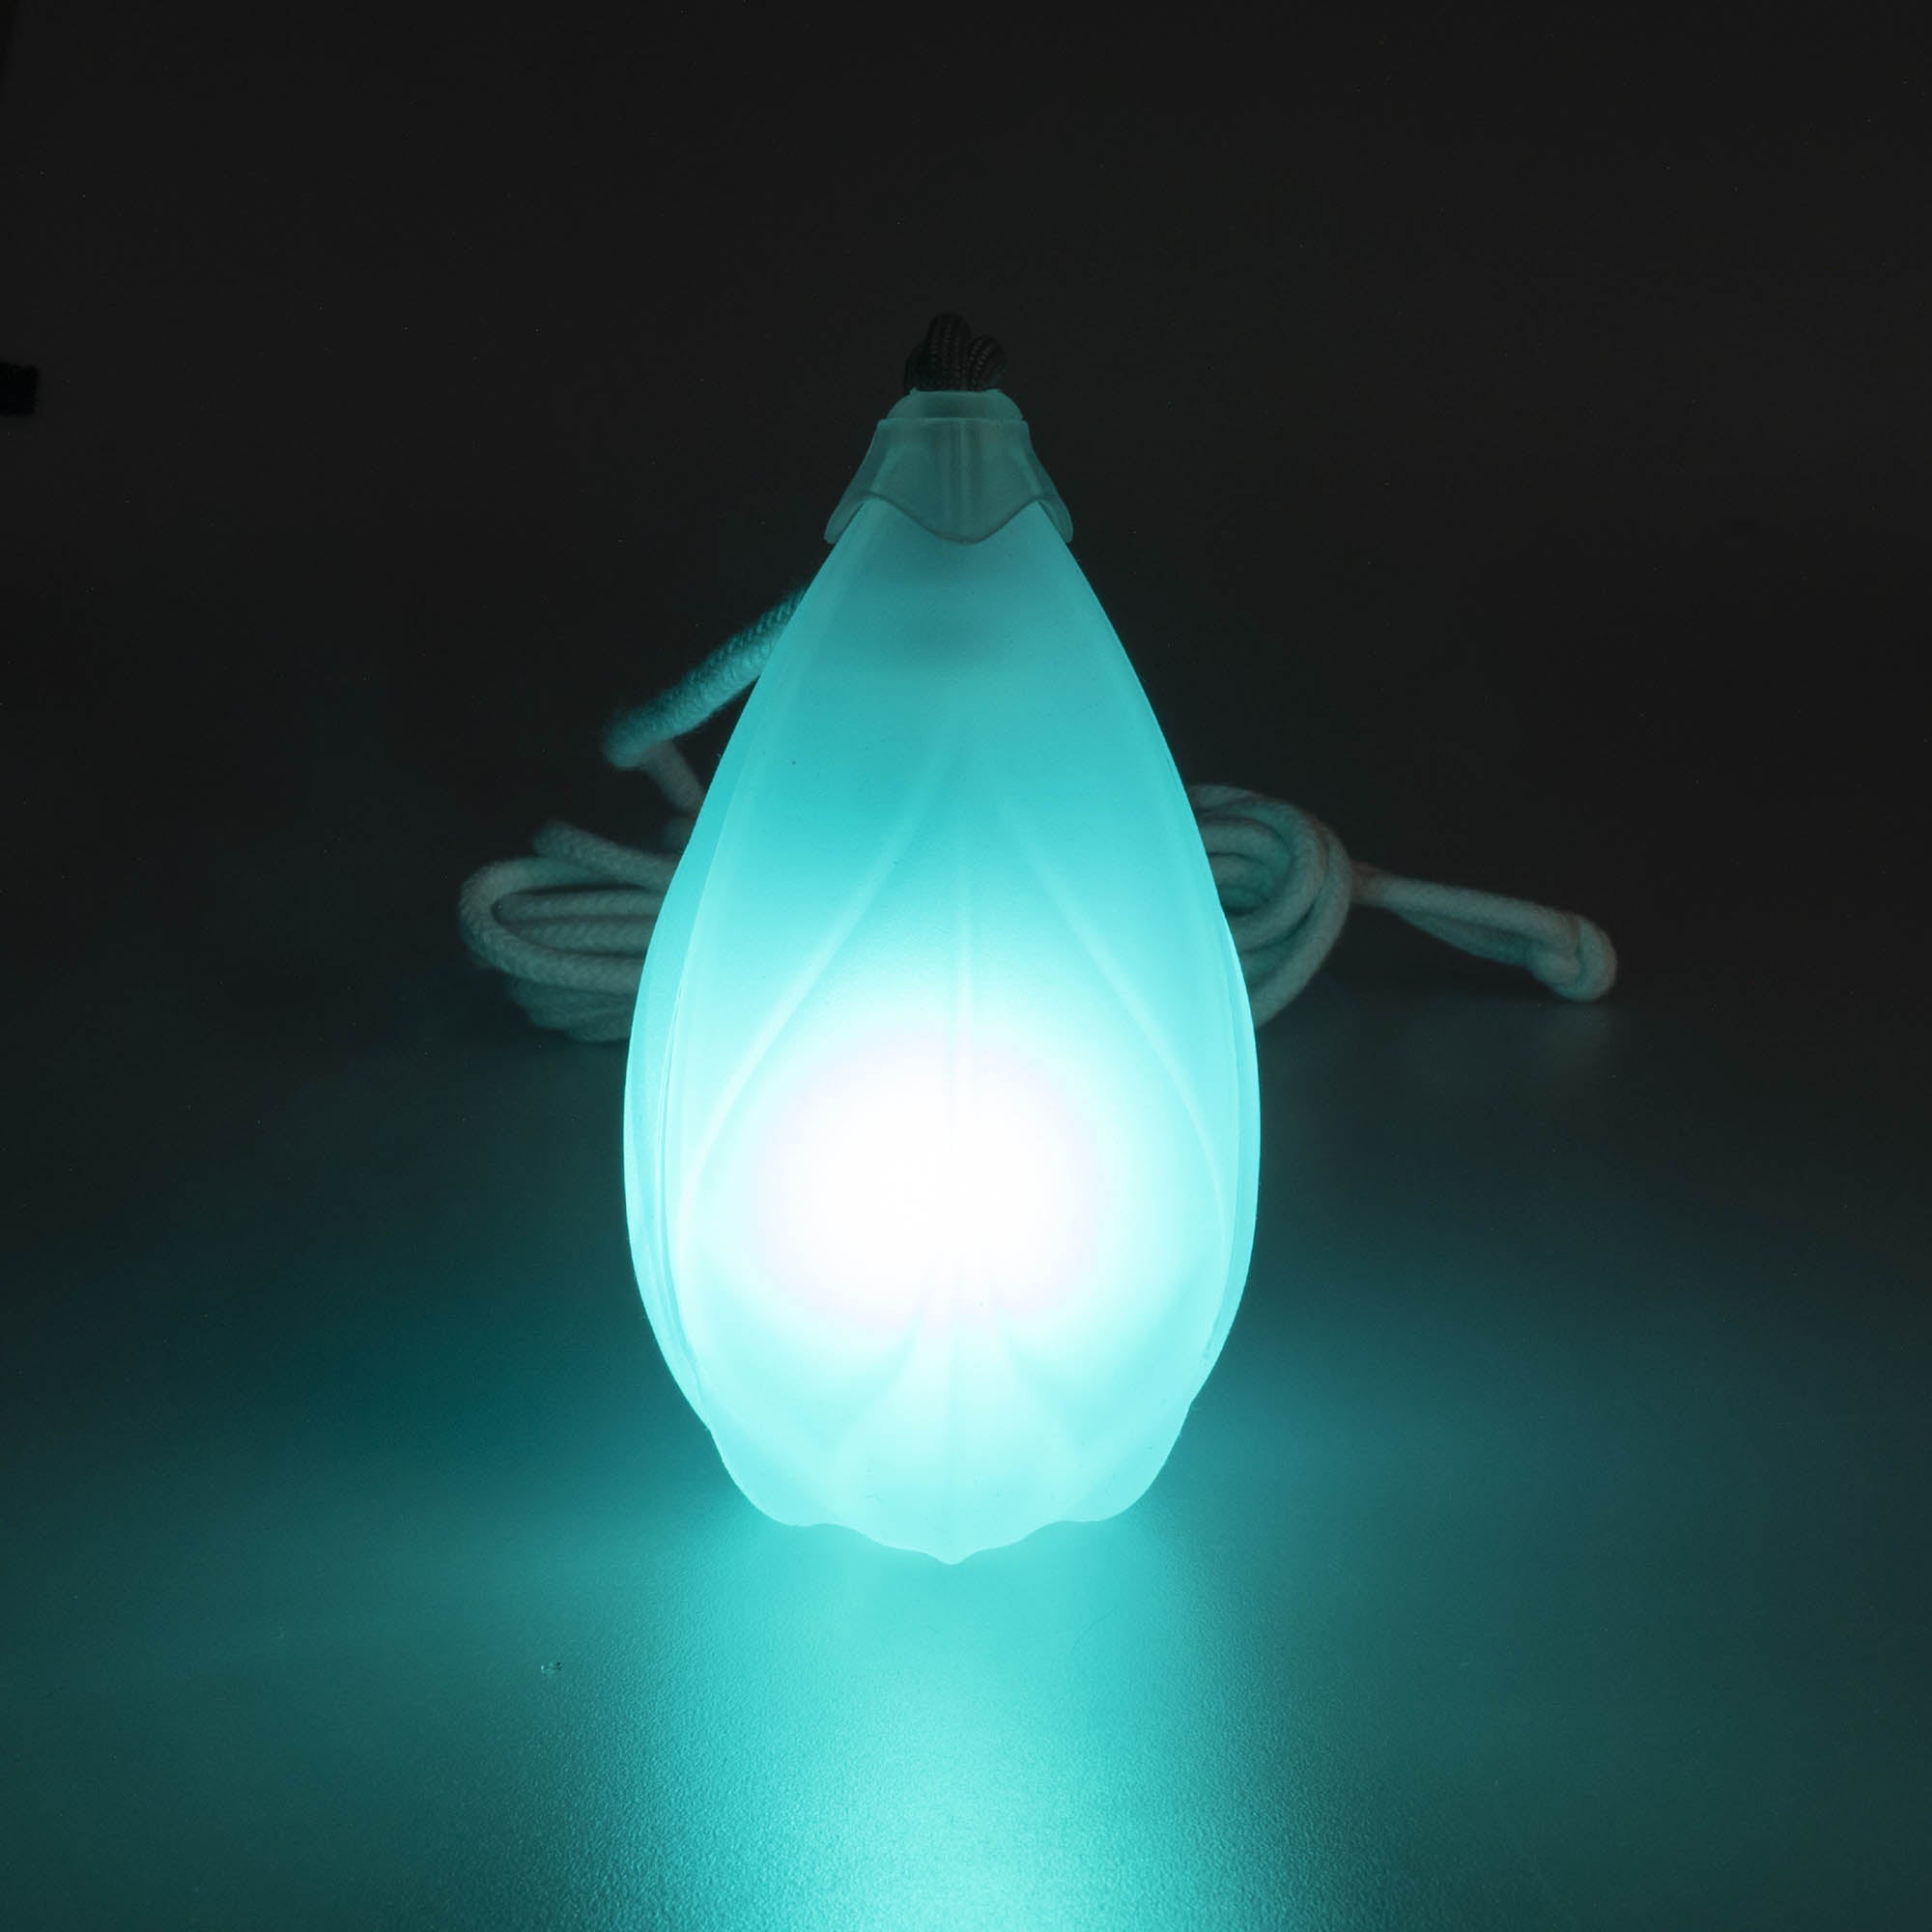 Flowtoys pod dart V2 glowing blue in a dark background with cord behind 